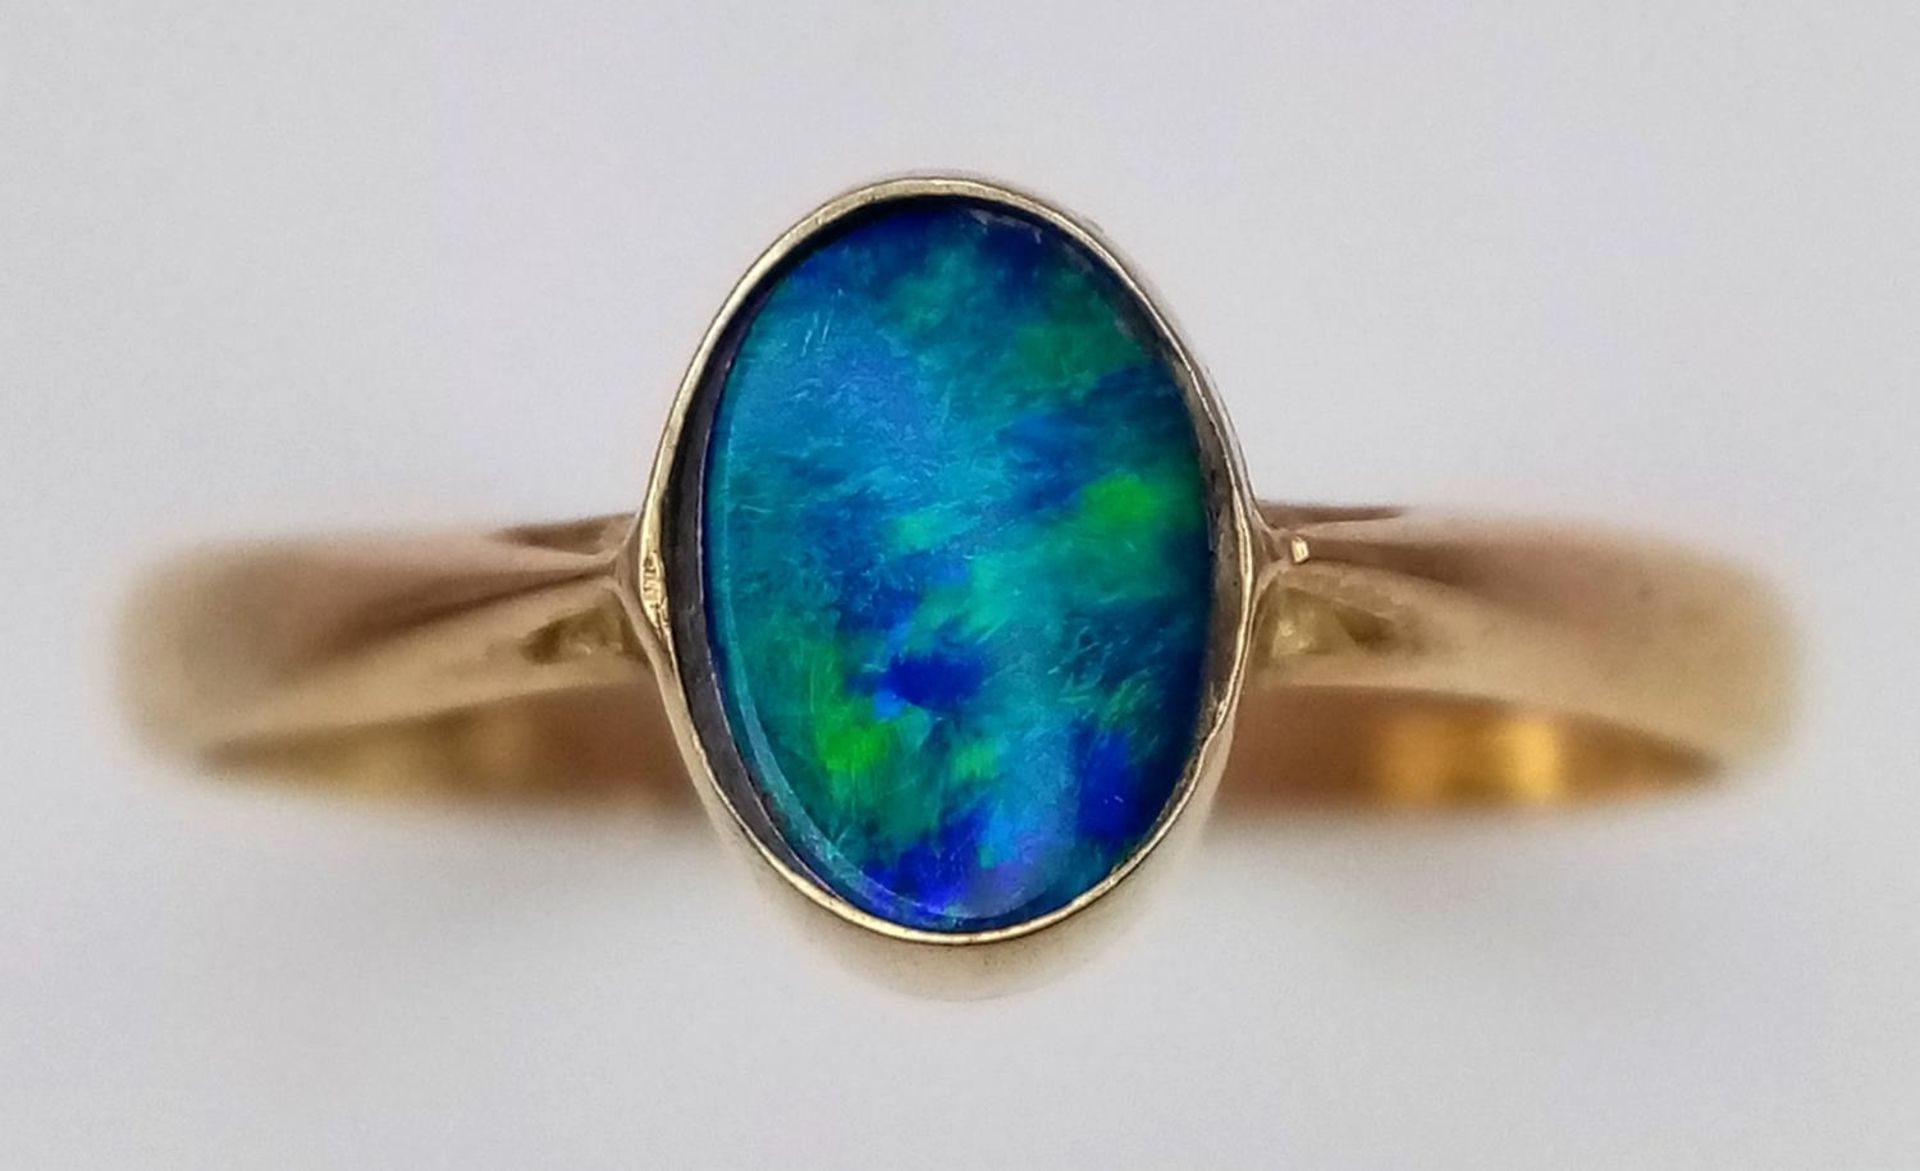 A 14K (TESTED) YELLOW GOLD DOUBLET OPAL RING. Size K, 1.4g total weight. Ref: SC 9033 - Image 2 of 5